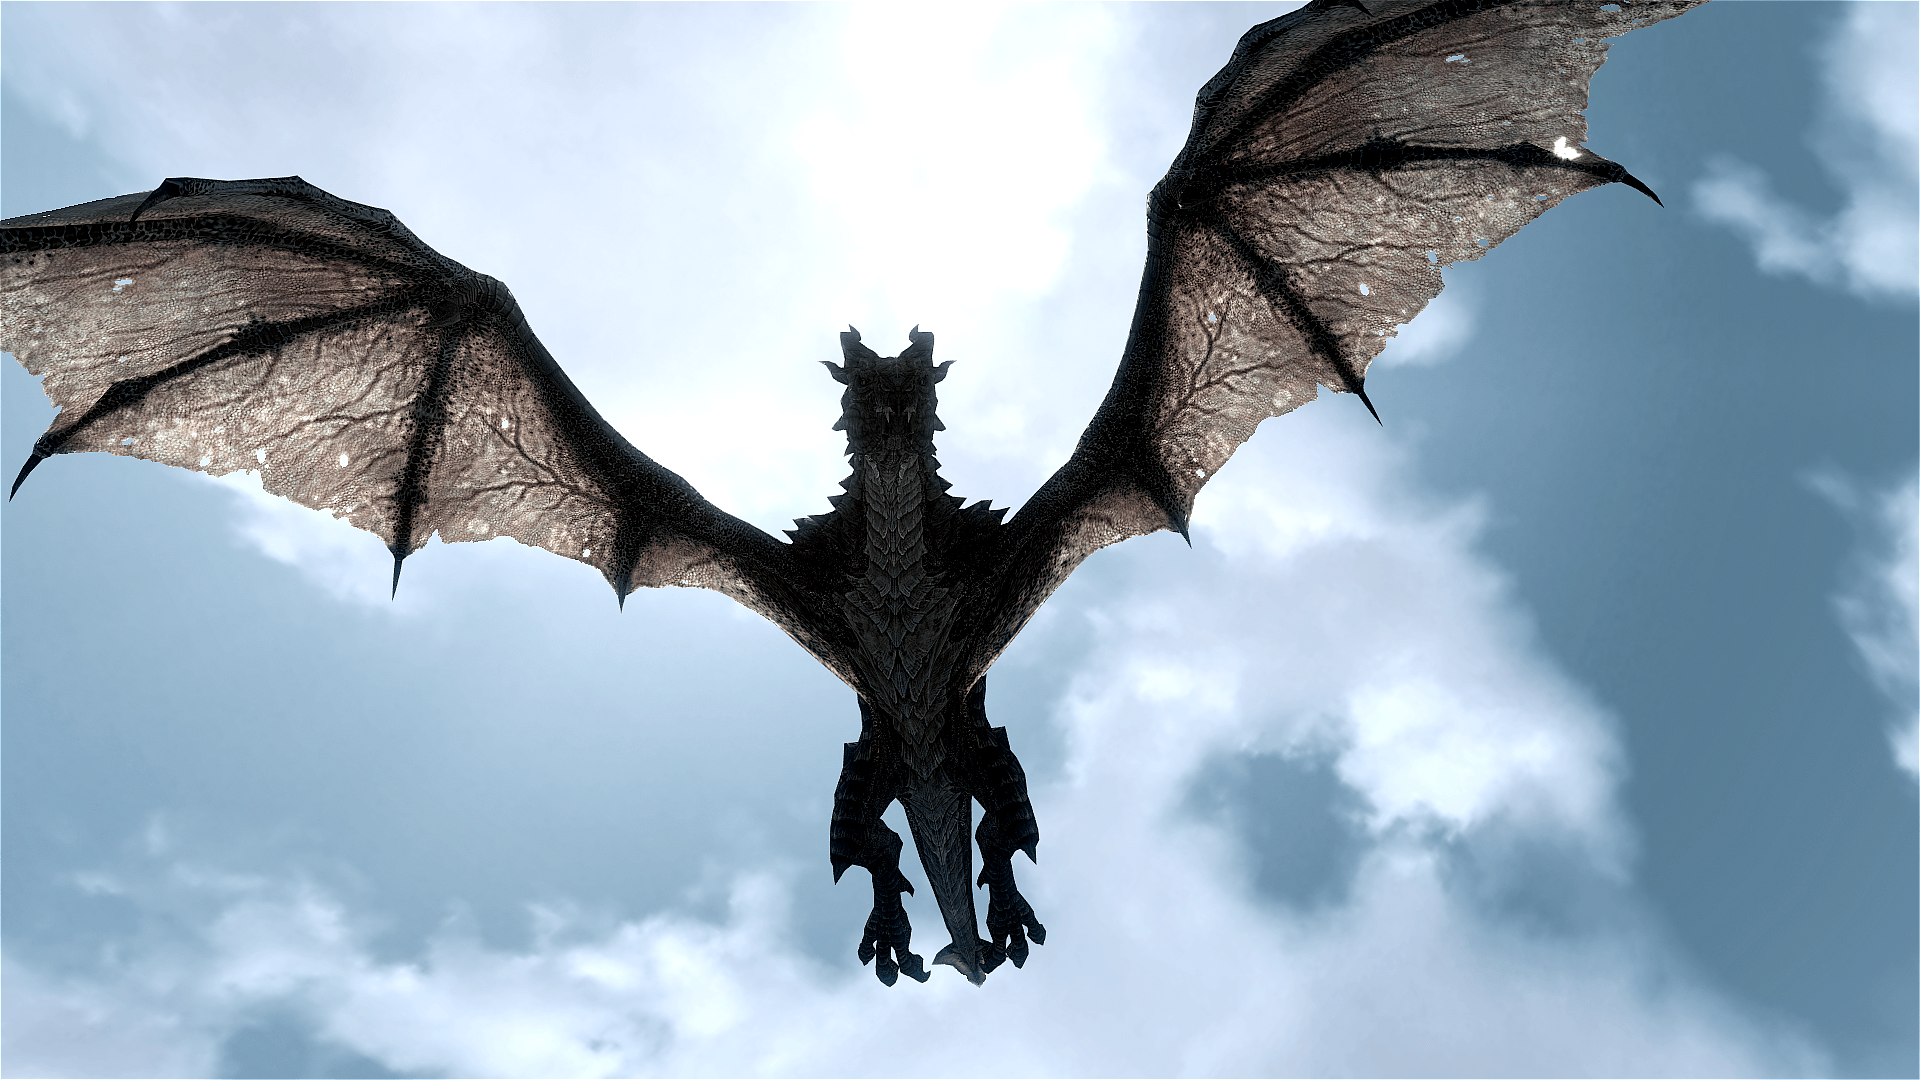 In the clouds flying dragon wallpaper and image